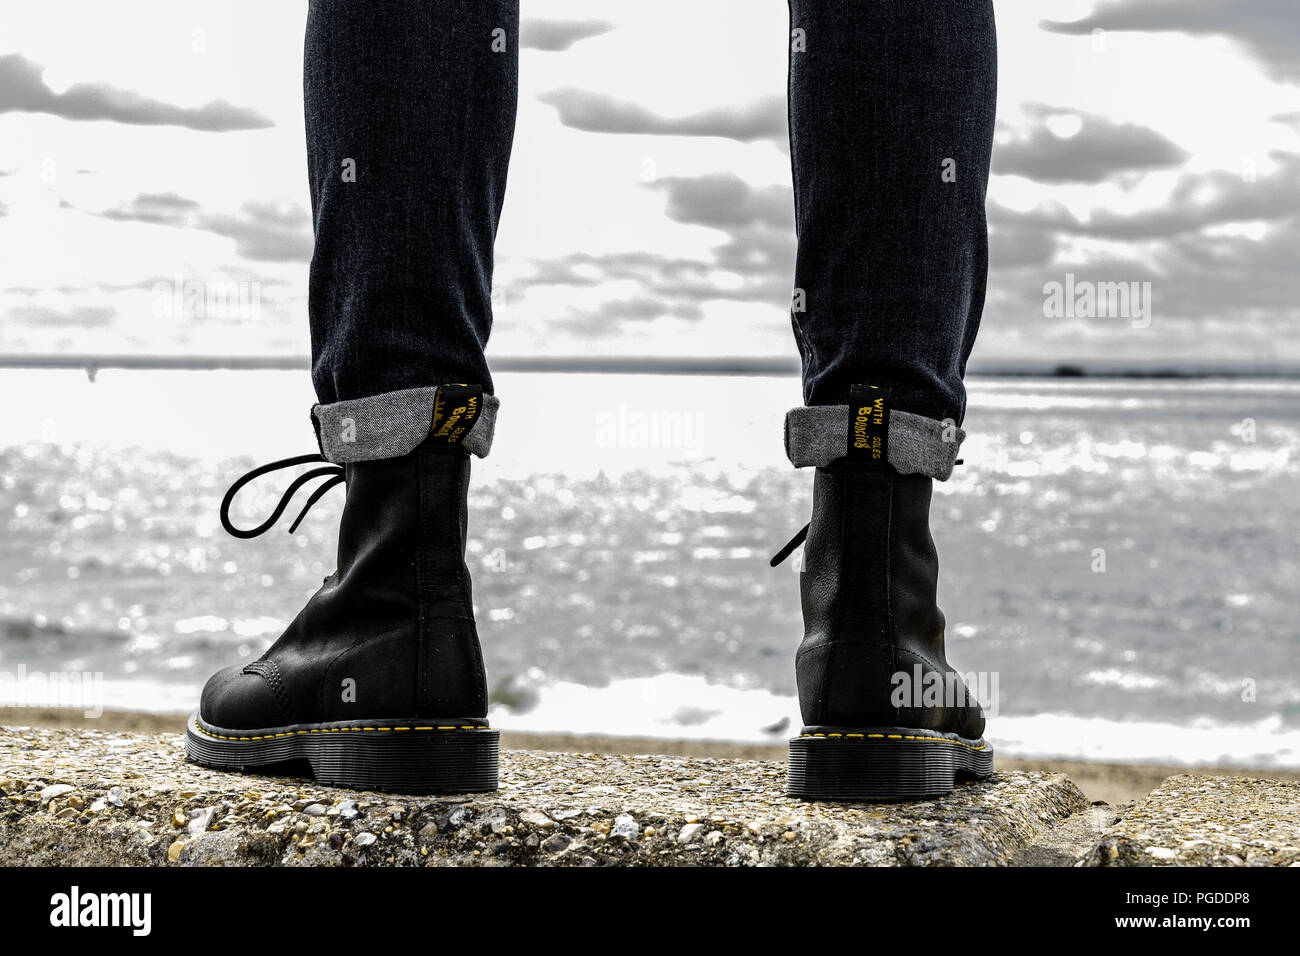 Doc Martens High Resolution Stock Photography and Images - Alamy